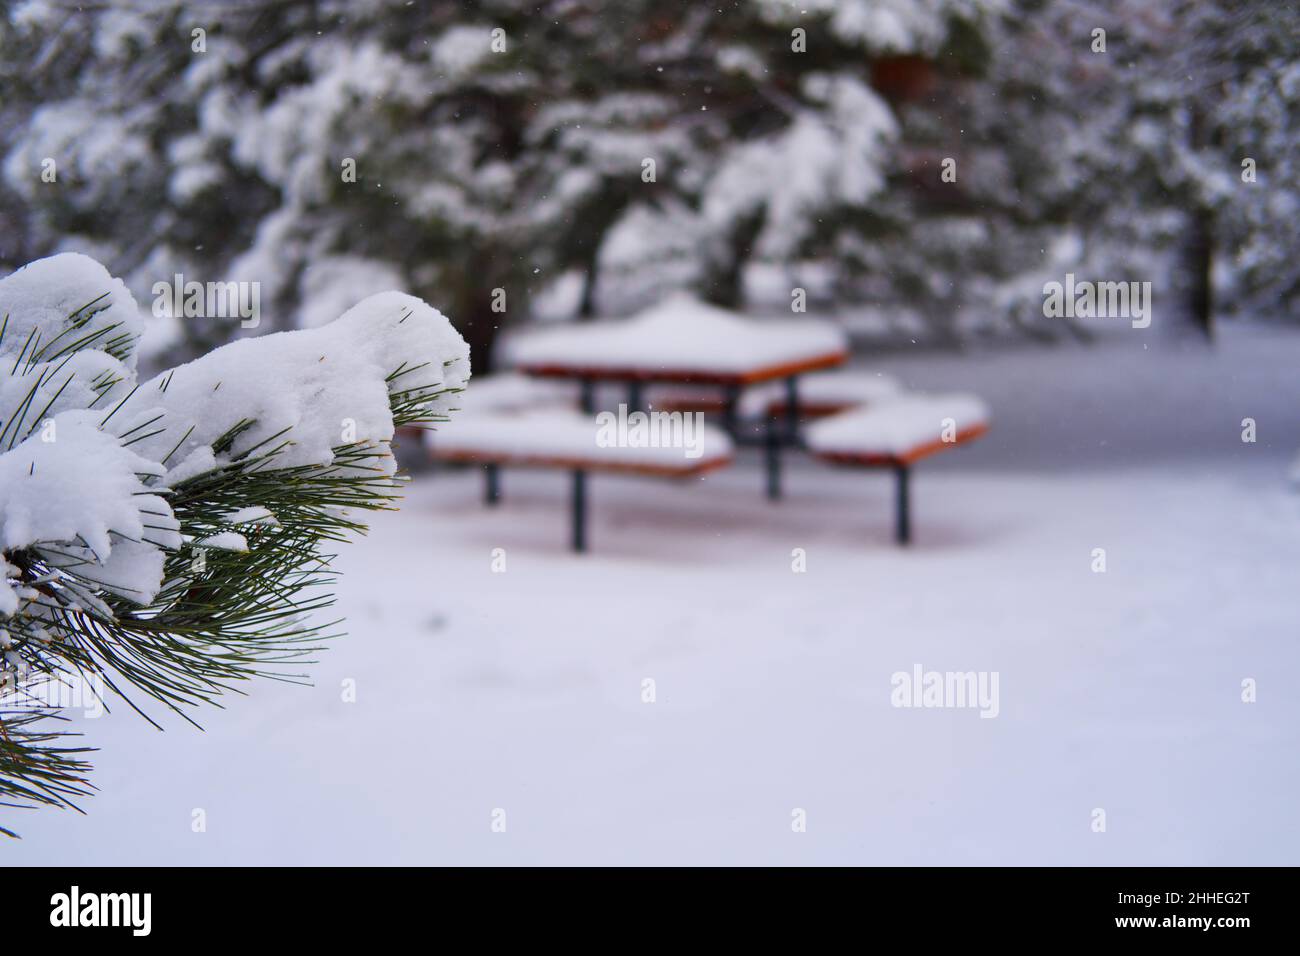 Wooden picnic table and benches under snow within pine trees at a cold winter day Stock Photo